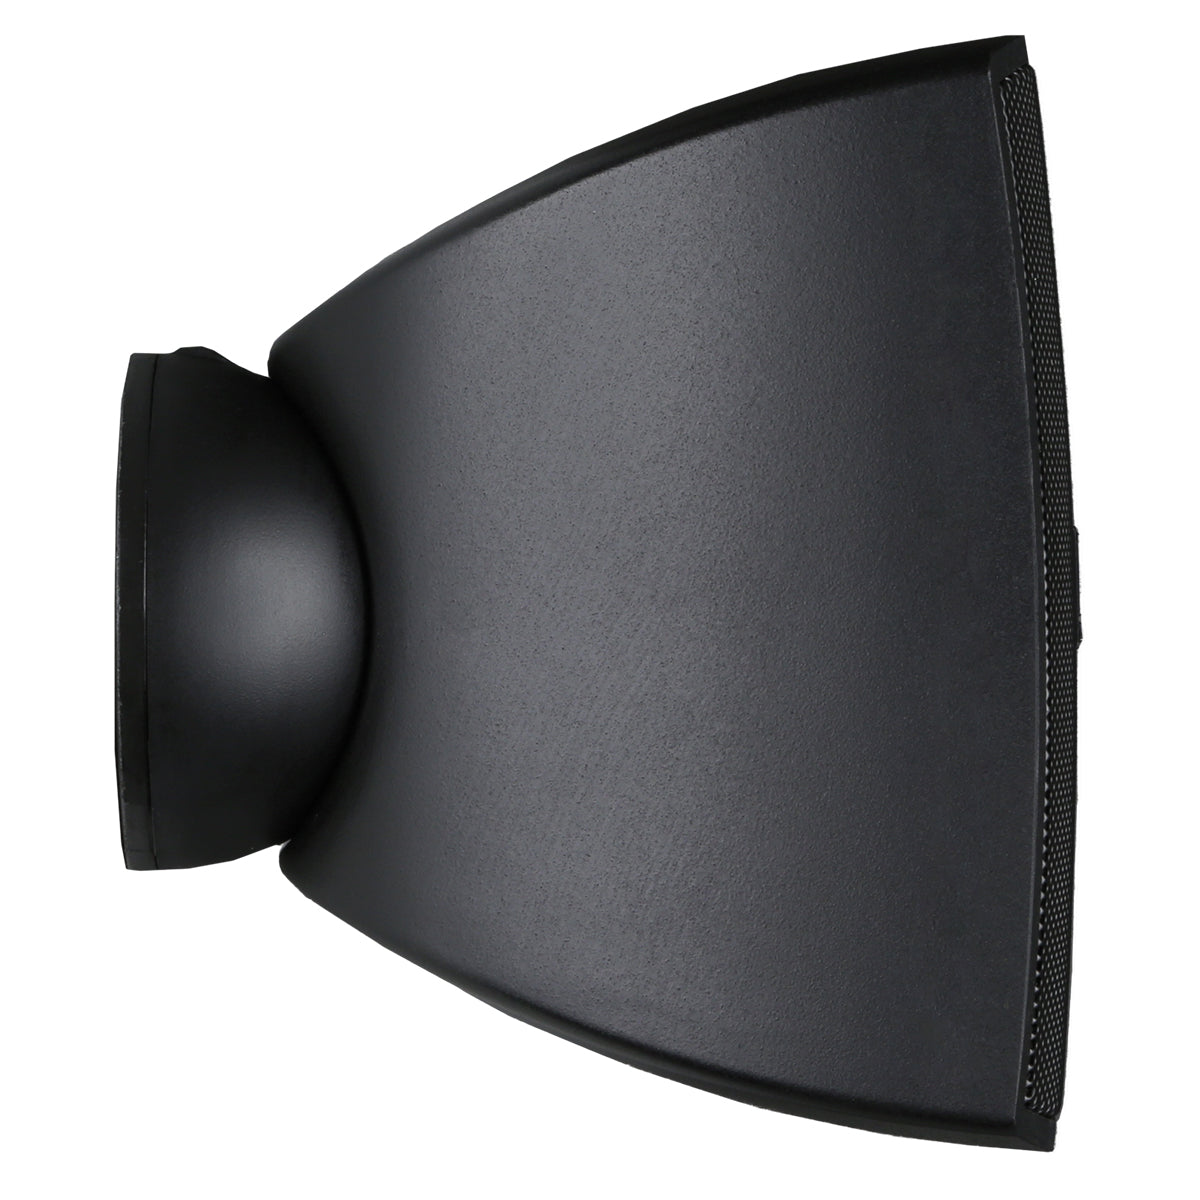 Audac ATEO2 Compact wall speaker with CleverMount 2" Black version - 8ohm